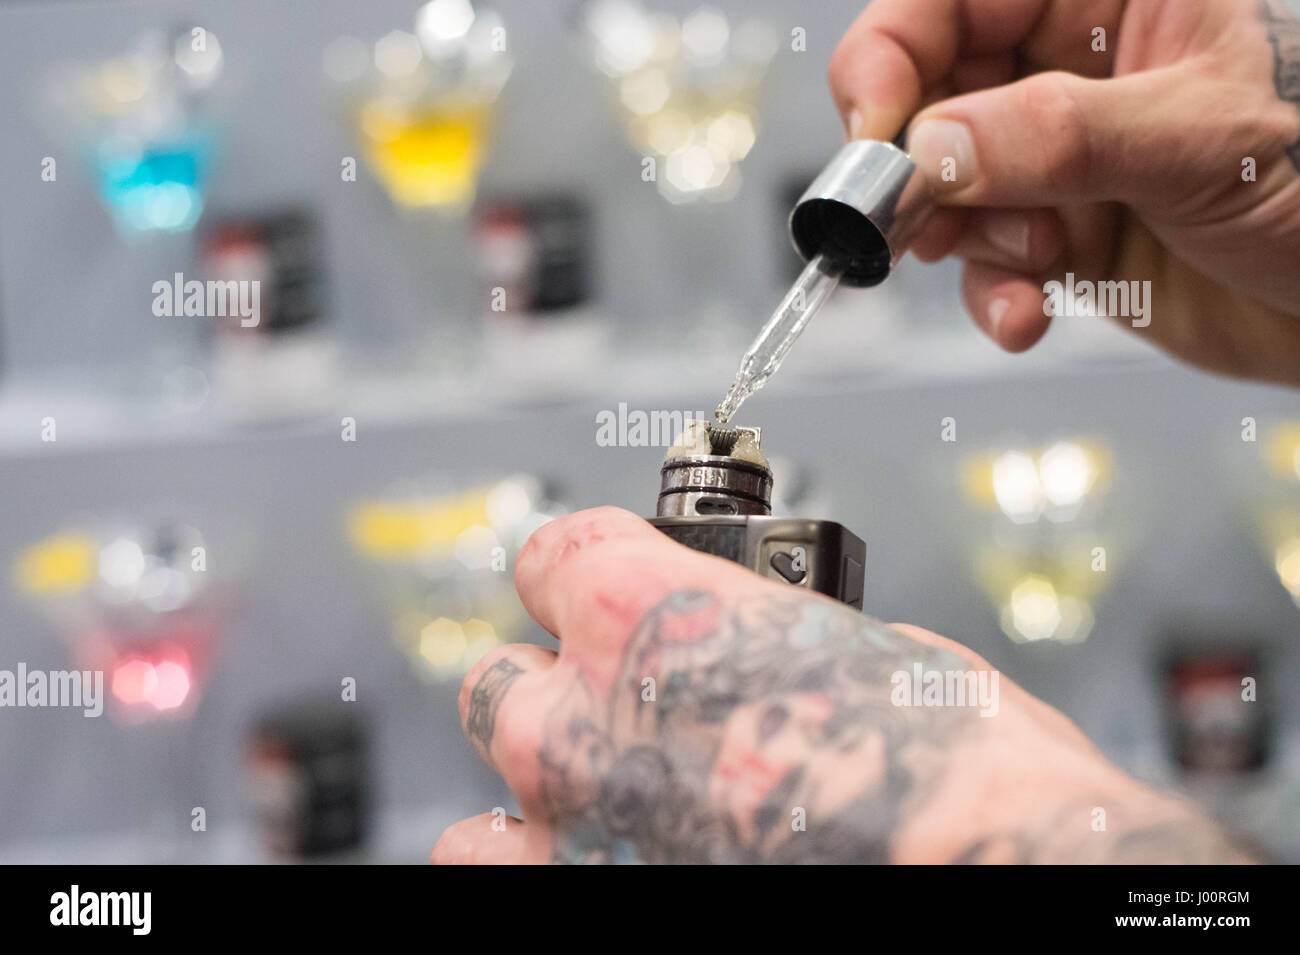 London, UK. 8th April, 2017. Vape Jam UK sees hundreds of vaping enthusiasts and electronic cigarette businesses attend the third instalment of Vape Jam convention at ExCeL London. © Guy Corbishley/Alamy Live News Stock Photo